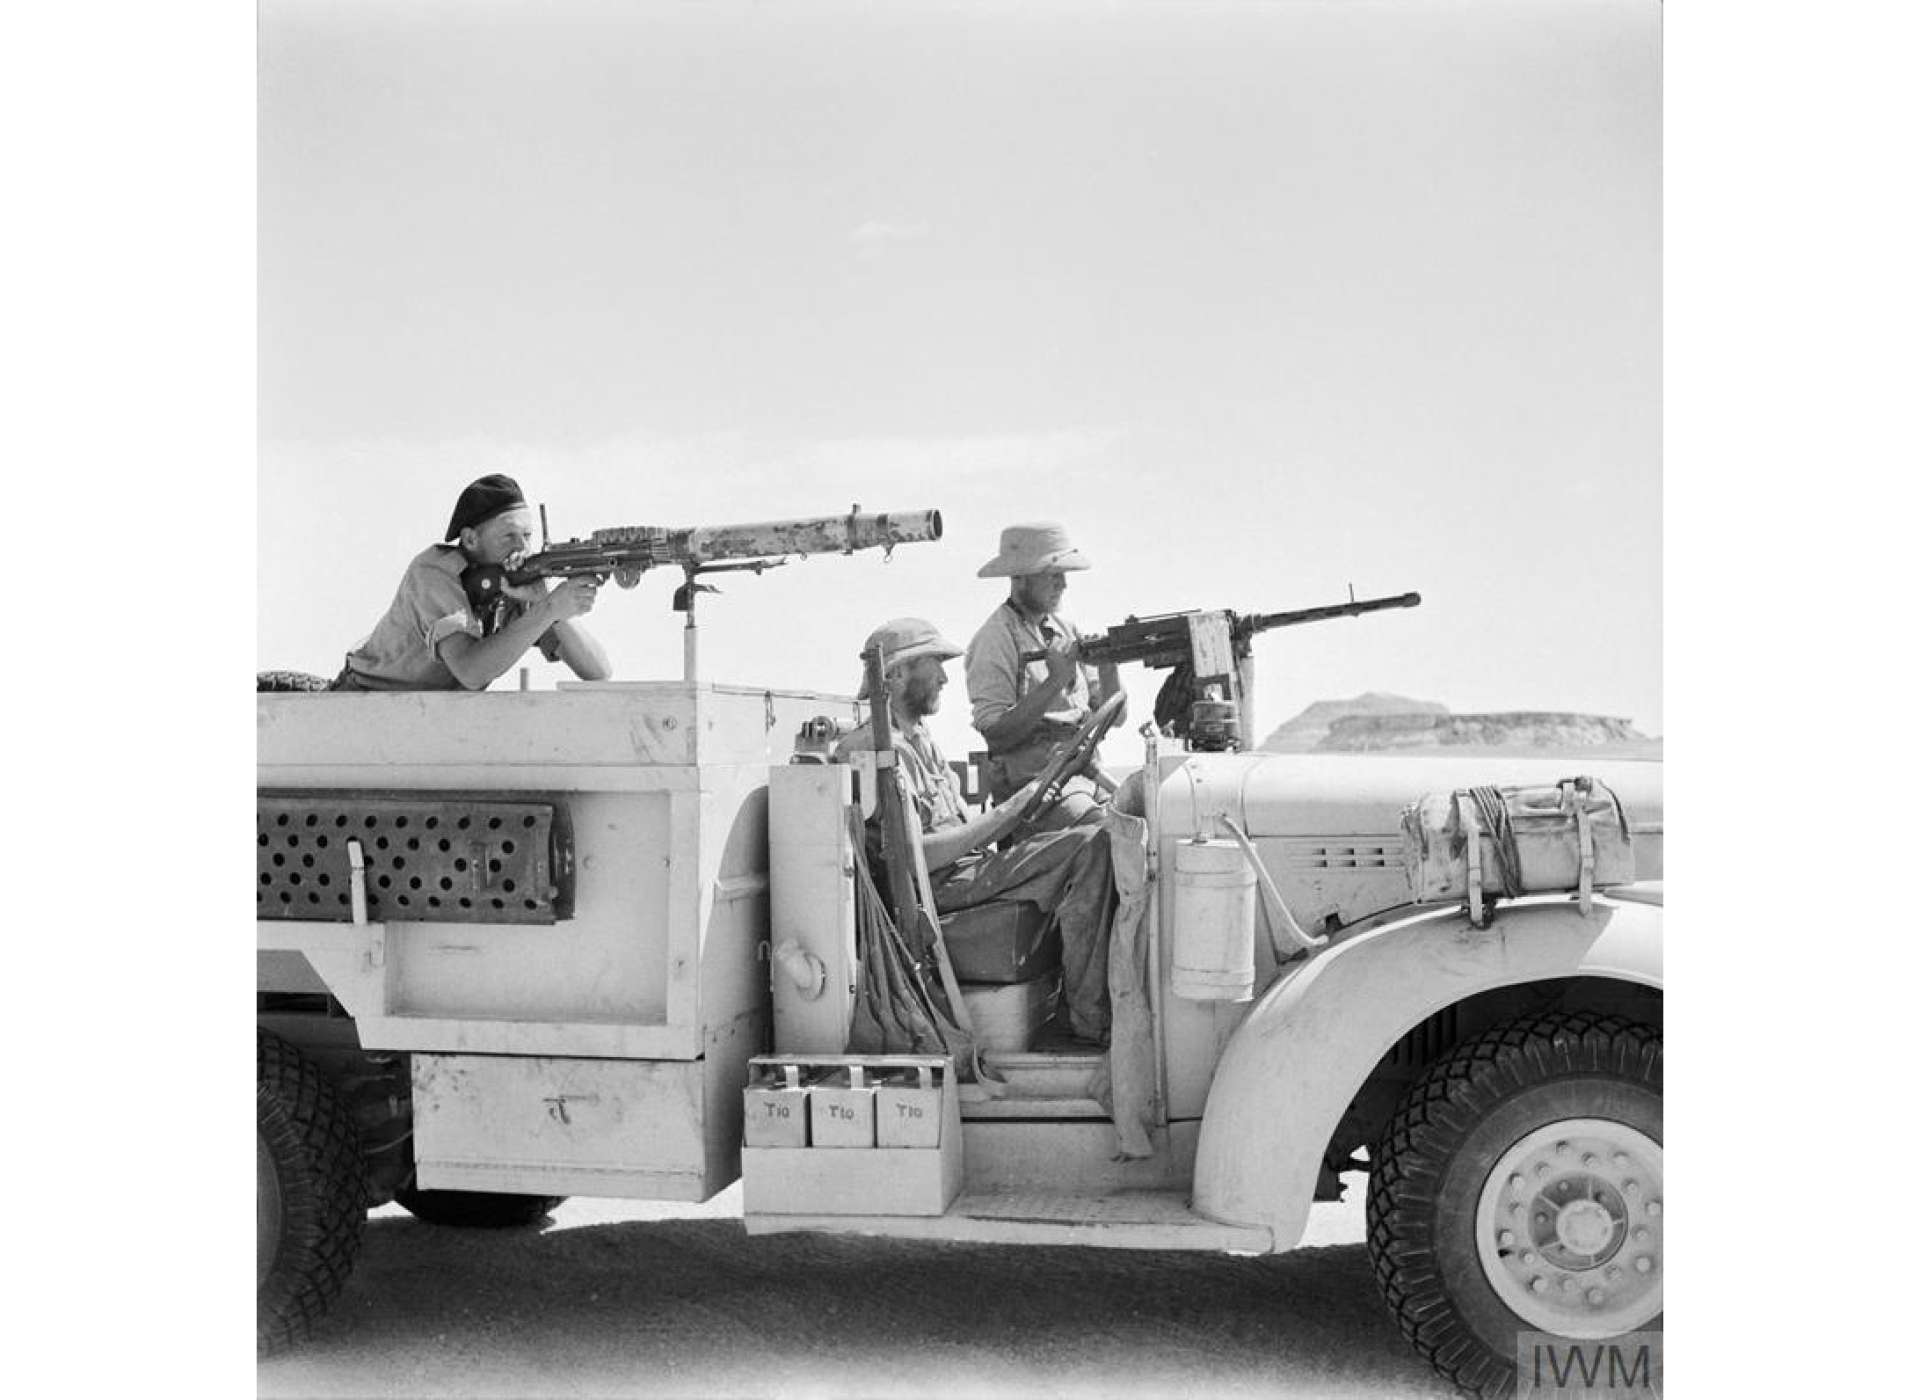 An LRDG Chevrolet truck and its three man crew. The gunner beside the driver is manning a Browning Mk II aircraft machine gun, while the gunner in the back has a Lewis gun. May 1942